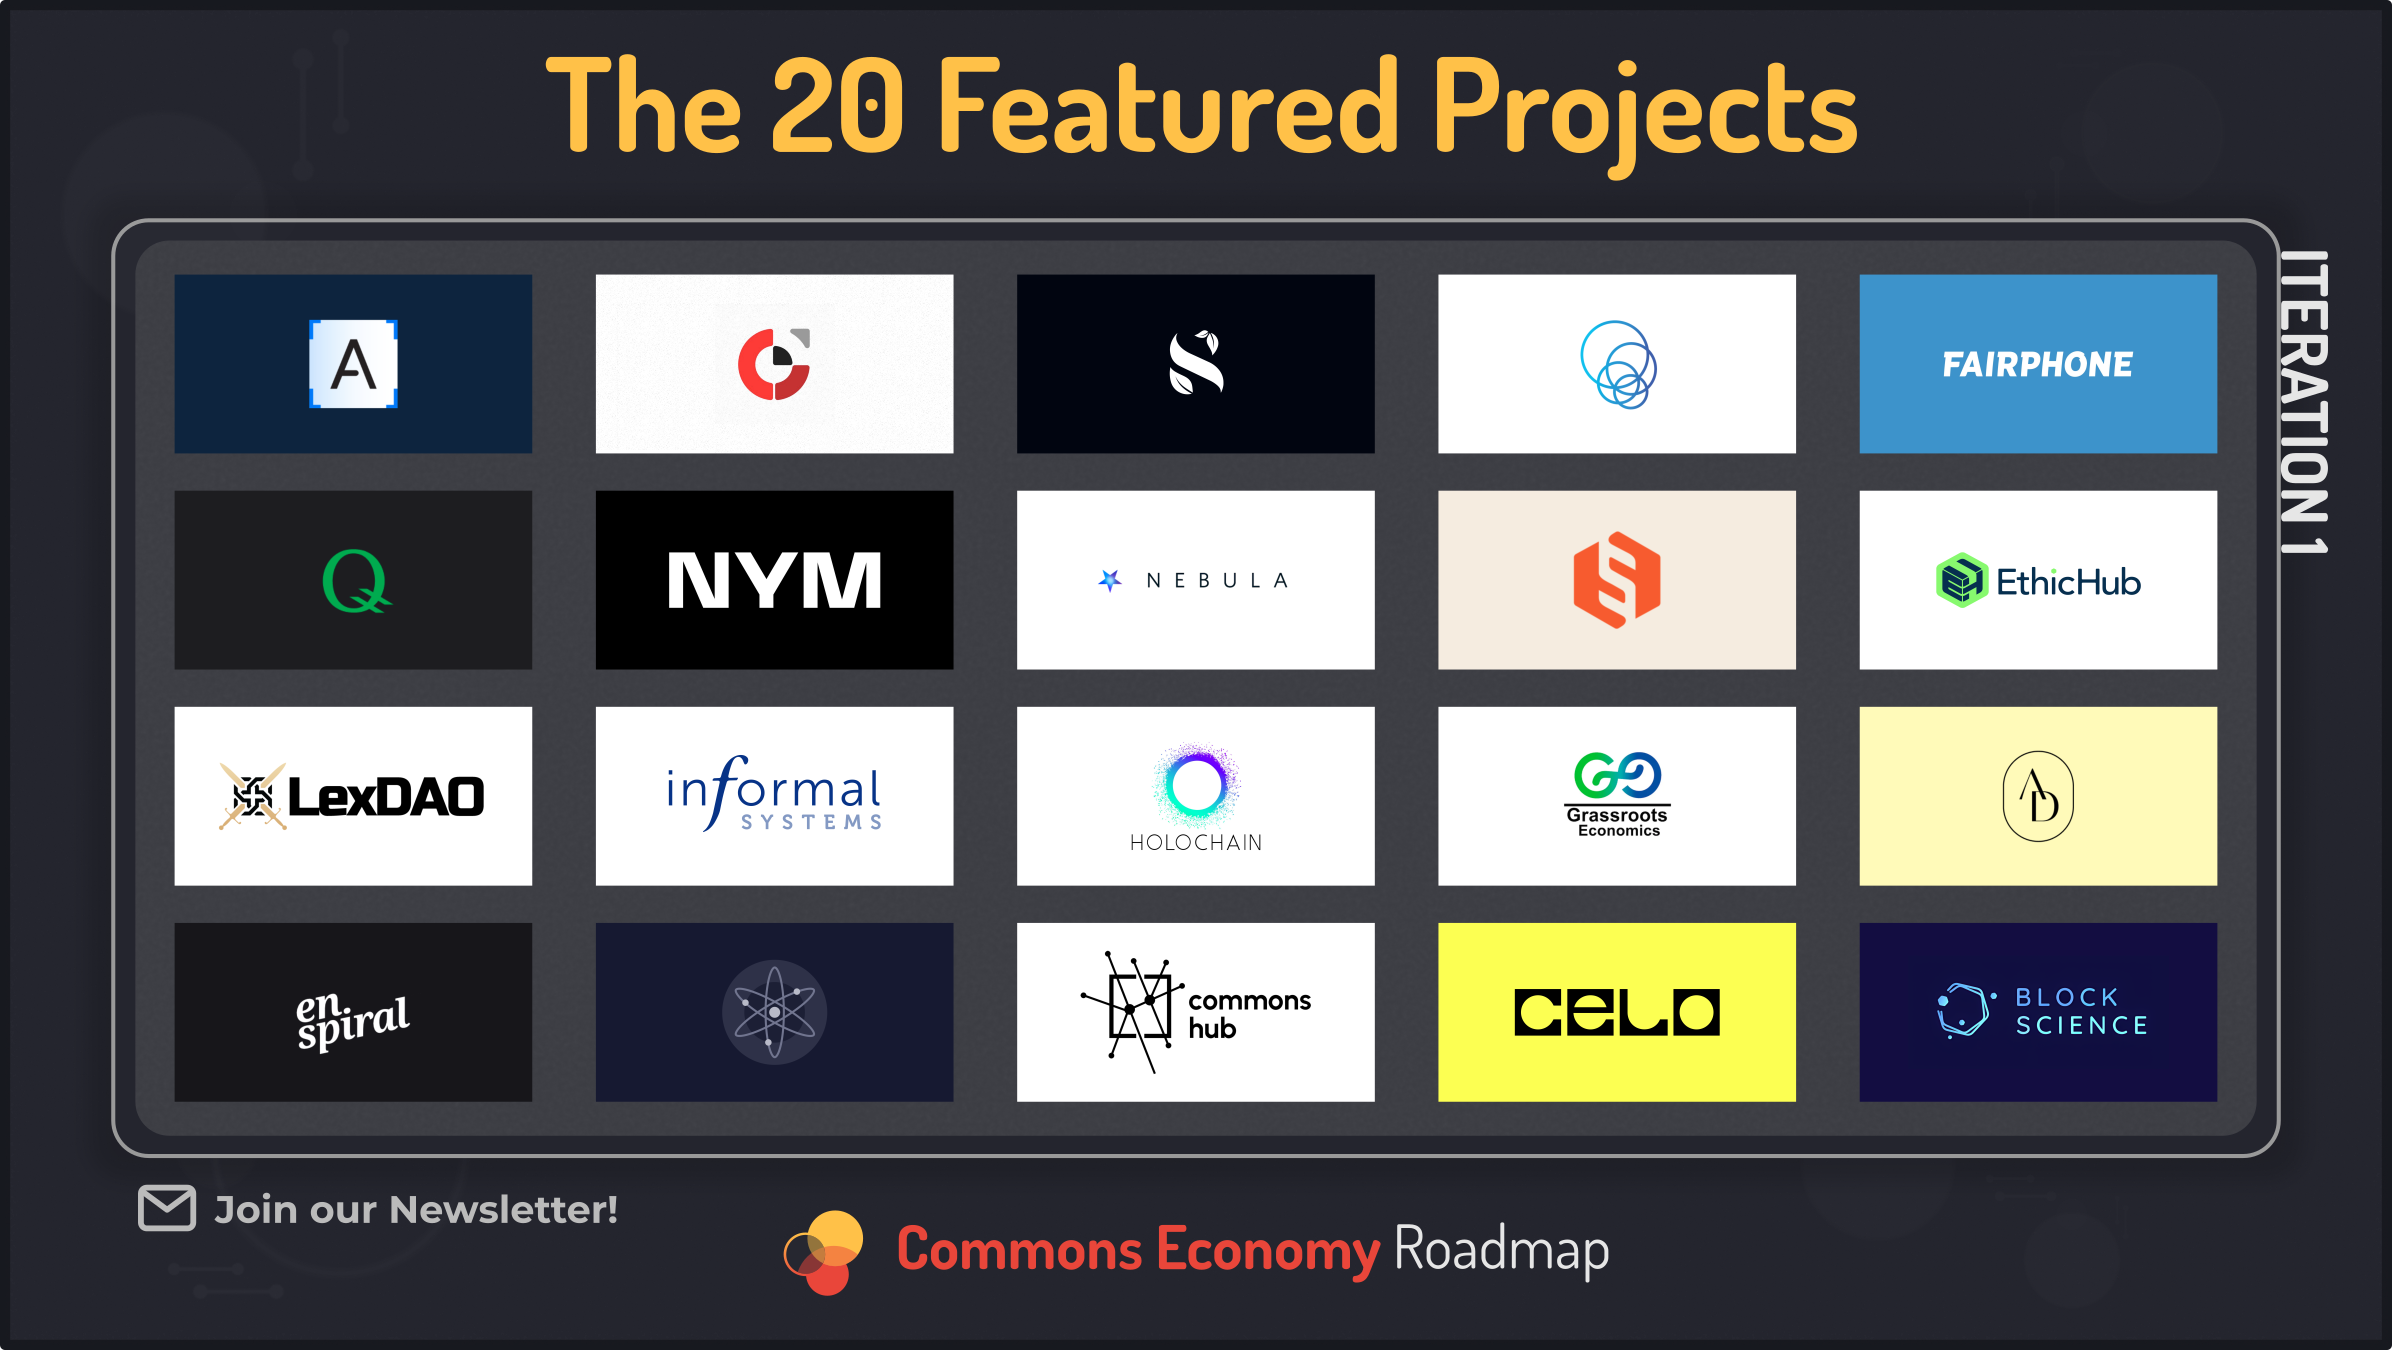 The most relevant 20 projects in the current economic juncture.